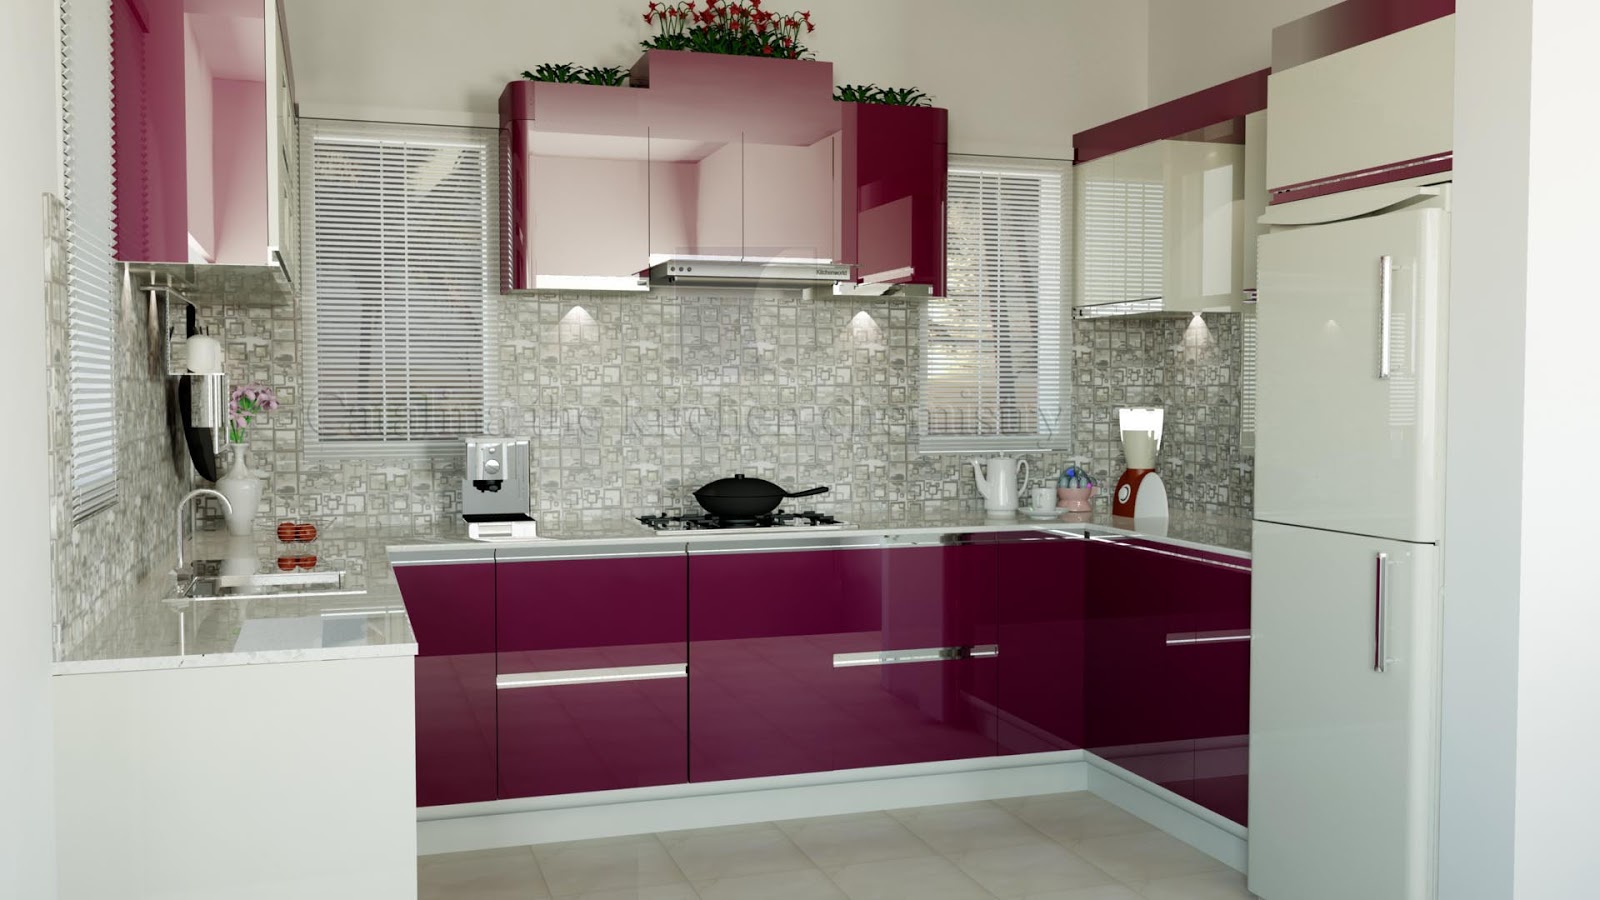 No.1 Modular Kitchen in Nagercoil: No.1 Modular Kitchen in Nagercoil